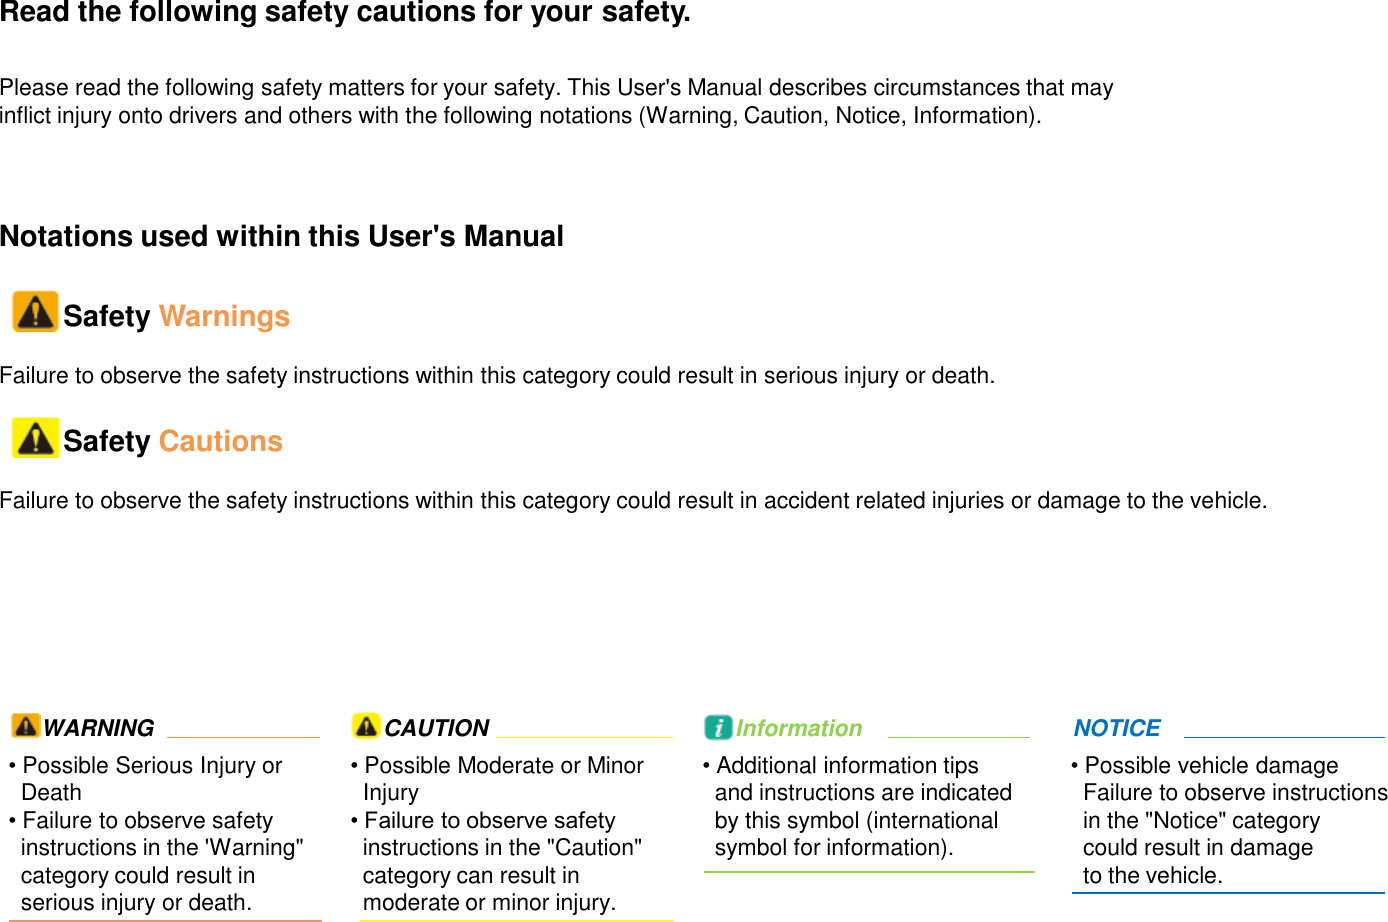 Read the following safety cautions for your safety.Please read the following safety matters for your safety. This User&apos;s Manual describes circumstances that mayinflict injury onto drivers and others with the following notations (Warning, Caution, Notice, Information).Notations used within this User&apos;s ManualSafety WarningsFailure to observe the safety instructions within this category could result in serious injury or death.Safety CautionsFailure to observe the safety instructions within this category could result in accident related injuries or damage to the vehicle.• Possible Serious Injury orDeath•Failure to observe safetyinstructions in the &apos;Warning&quot;category could result inserious injury or death.WARNING• Possible Moderate or MinorInjury• Failure to observe safetyinstructions in the &quot;Caution&quot;category can result in   moderate or minor injury.CAUTION• Additional information tipsand instructions are indicatedby this symbol (internationalsymbol for information).Information• Possible vehicle damageFailure to observe instructionsin the &quot;Notice&quot; categorycould result in damageto the vehicle.NOTICE